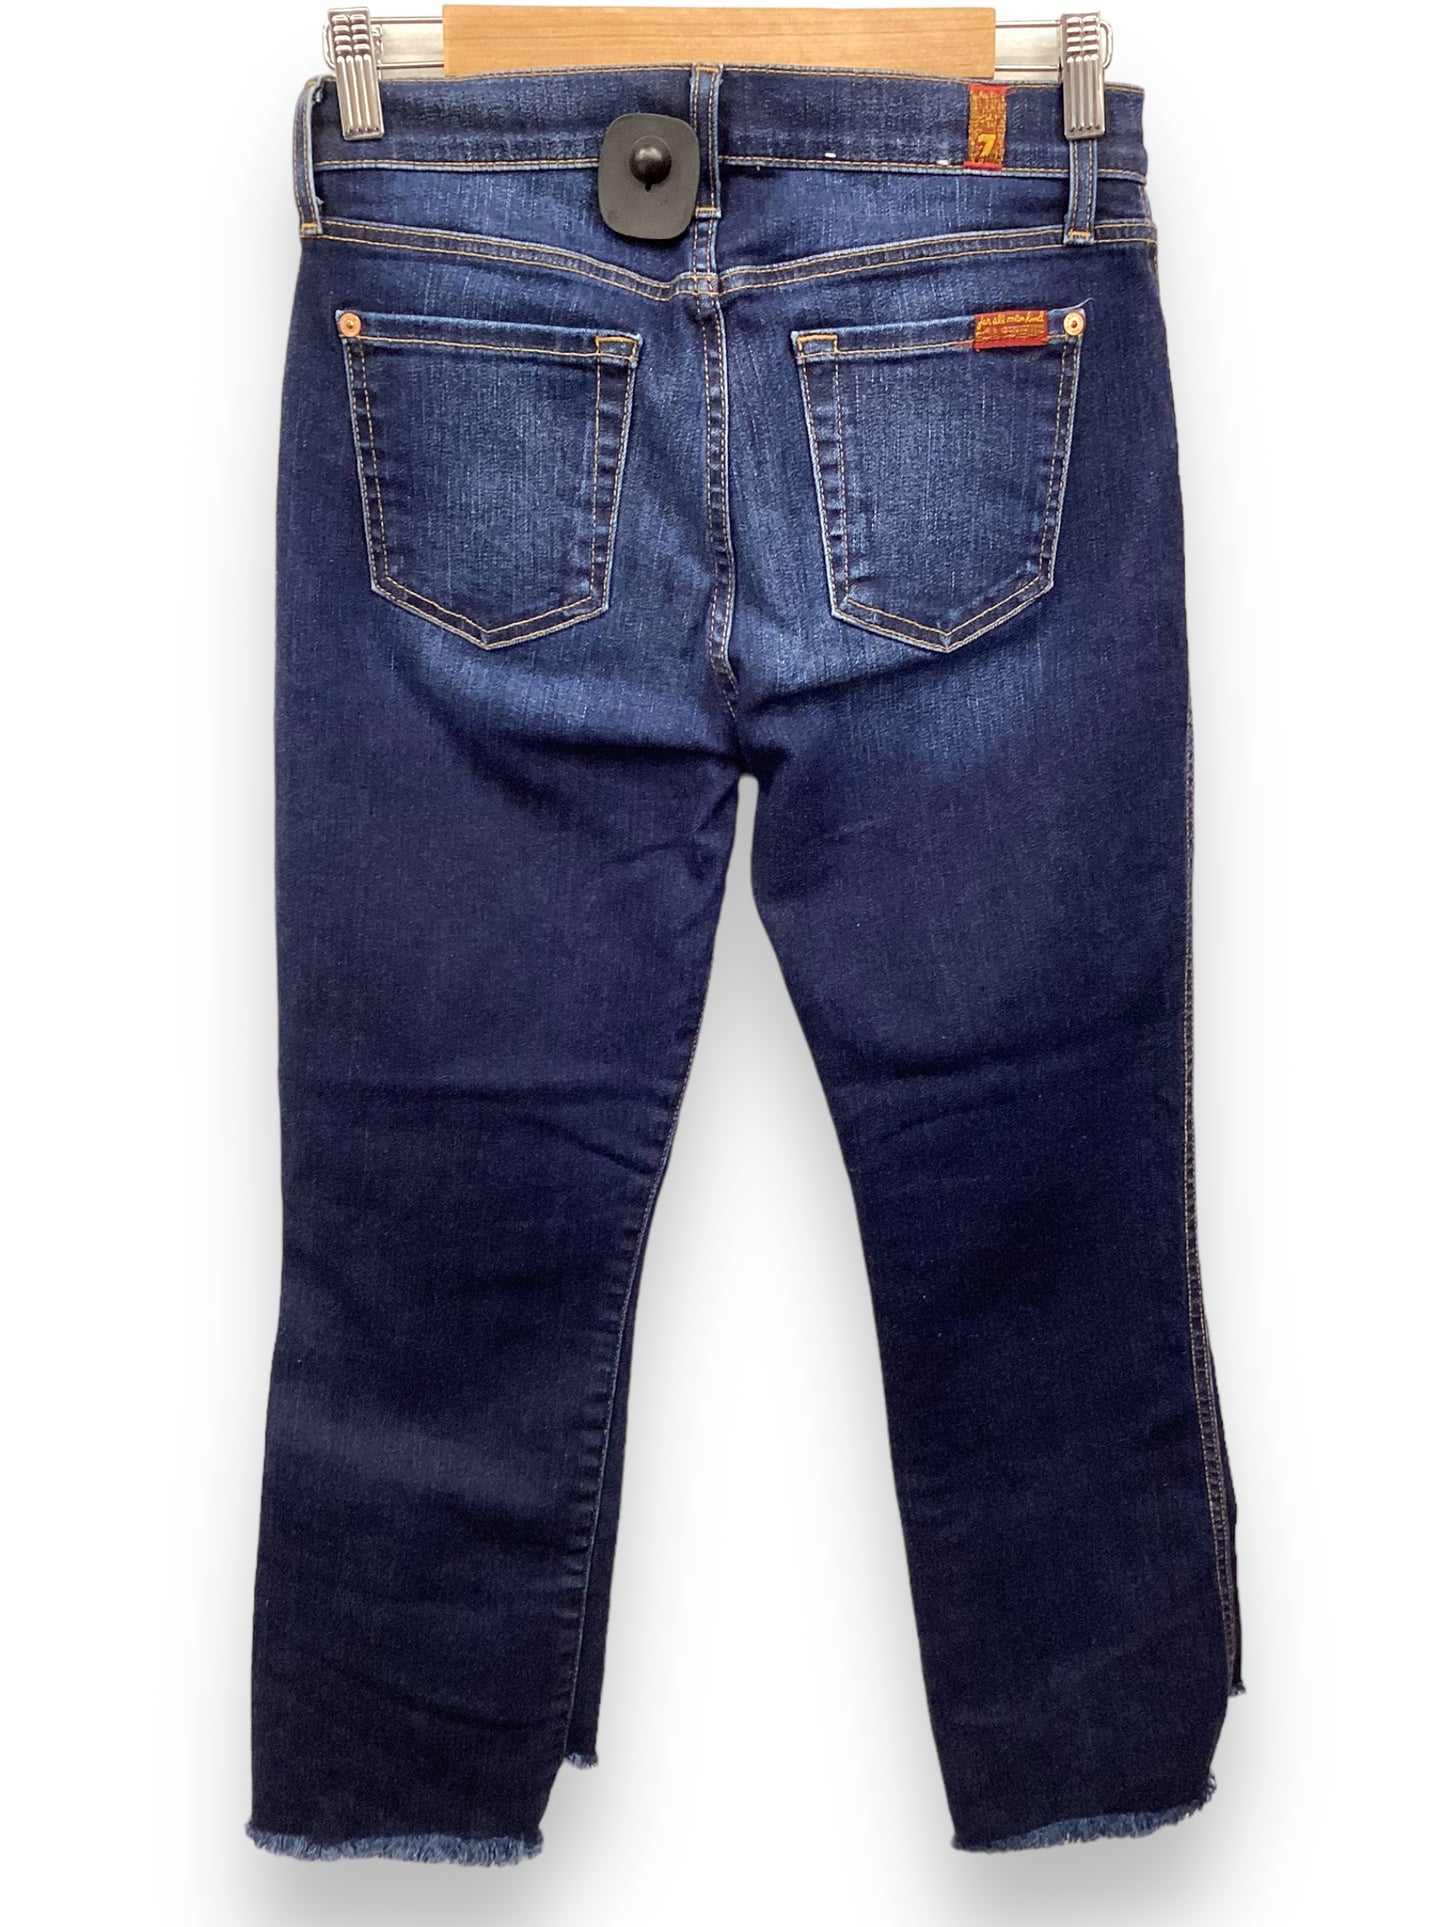 Jeans Straight By 7 For All Mankind  Size: 4